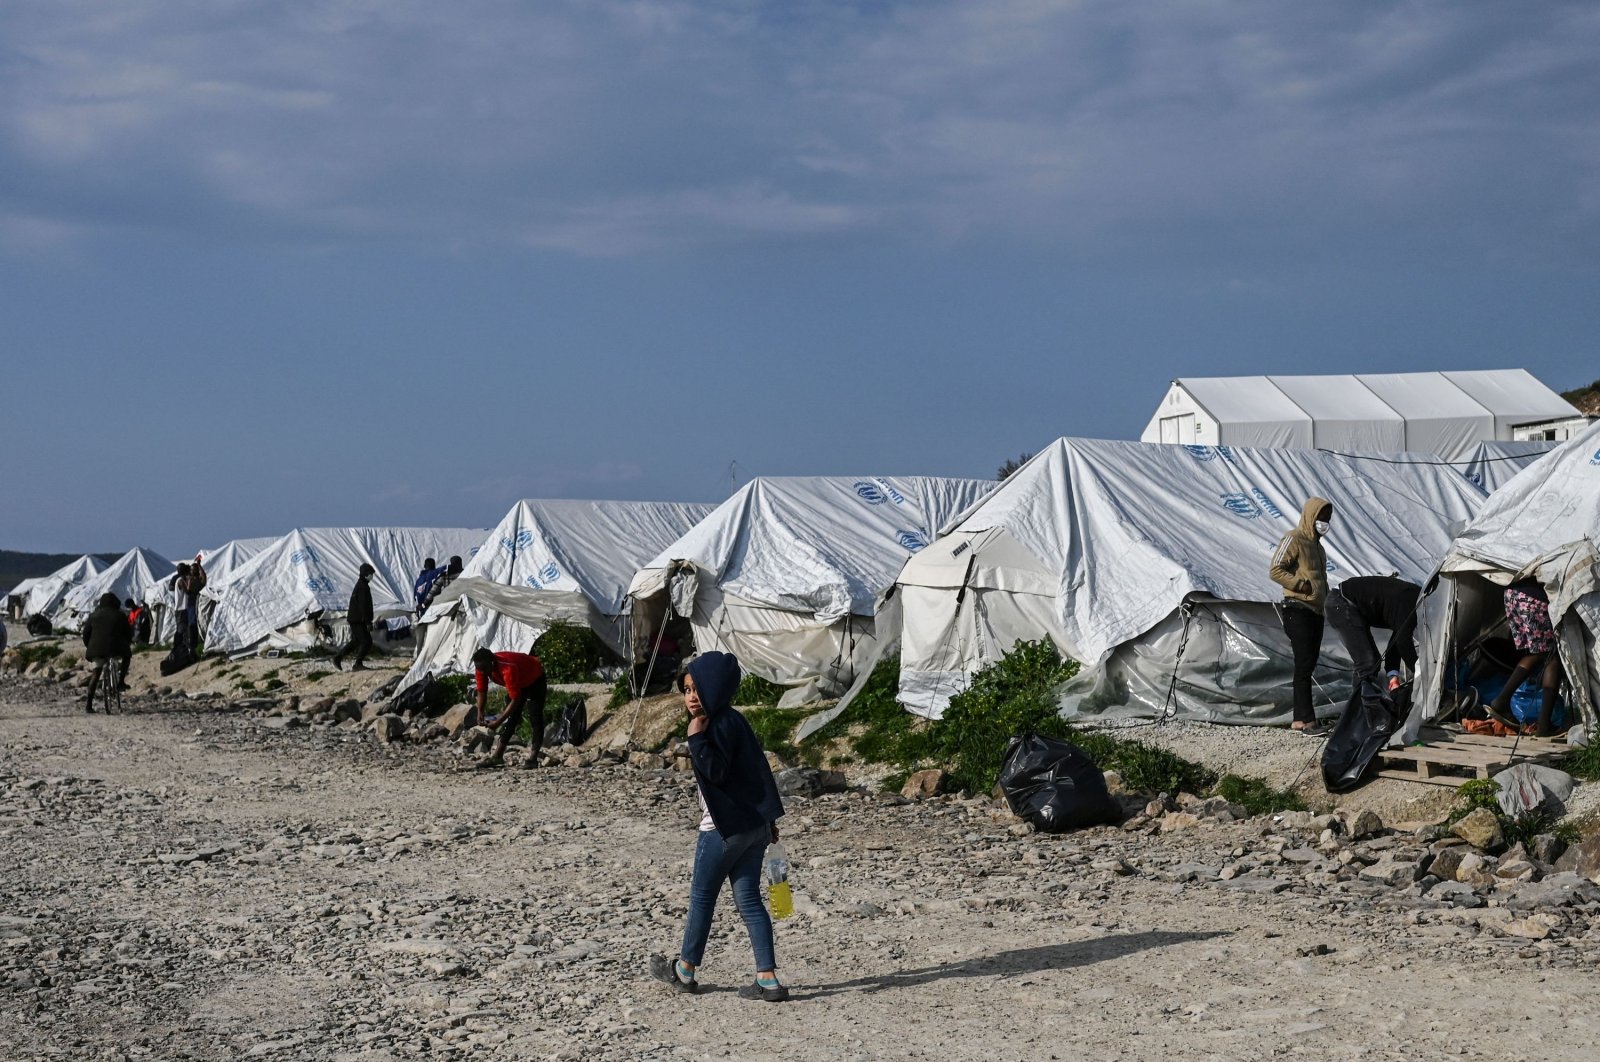 A child walks past tents inside the new refugee camp of Kara Tepe in Mytilene, on Lesbos, Greece, March 29, 2021. (AFP Photo)